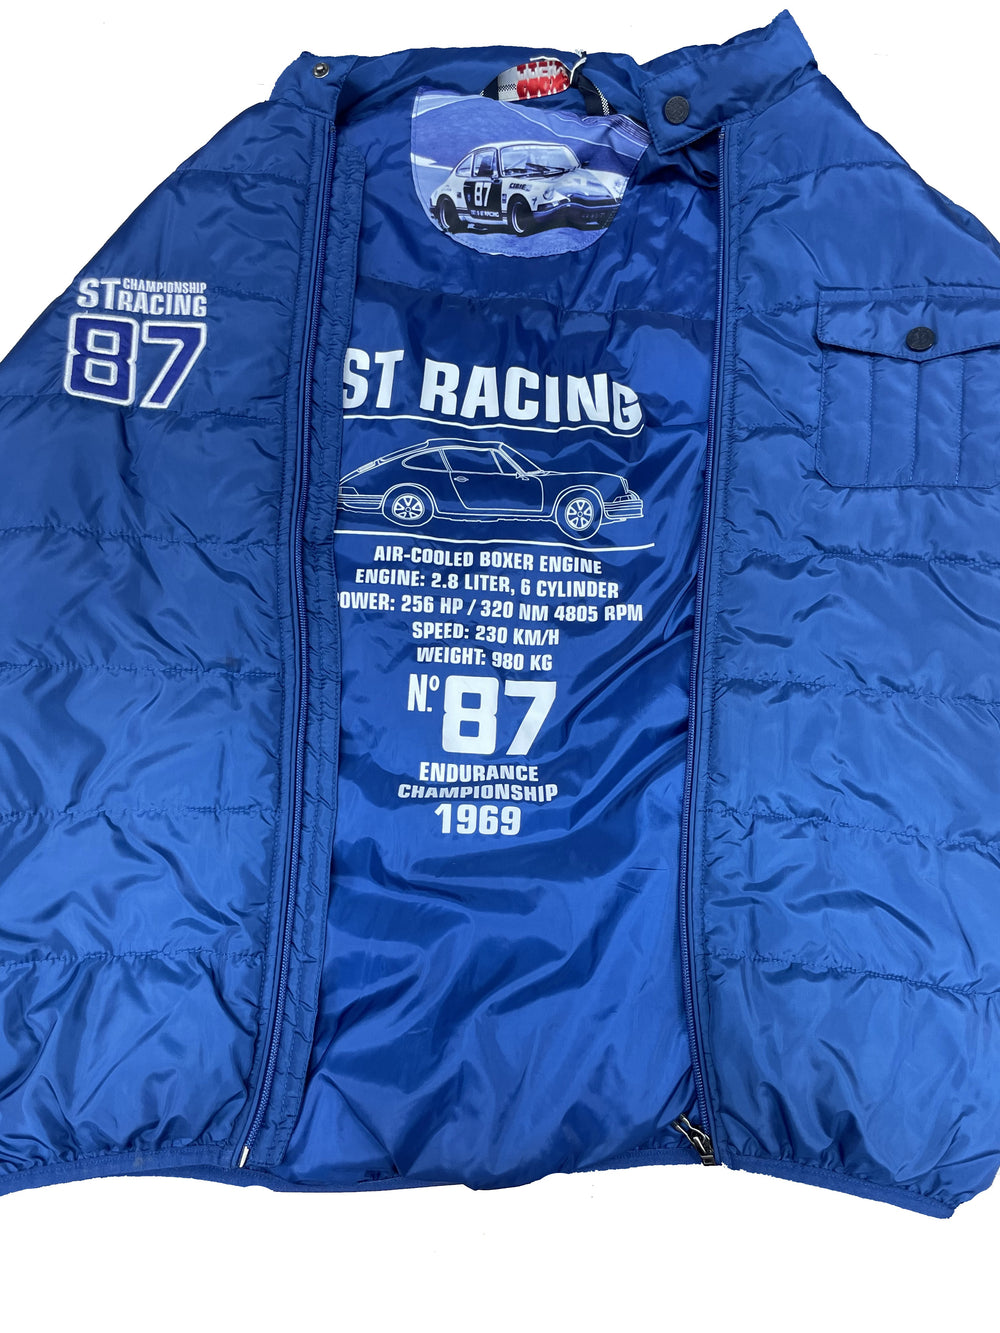 Porsche 911 with this State of Art Racing St Champion Racing 87‘ Jacket